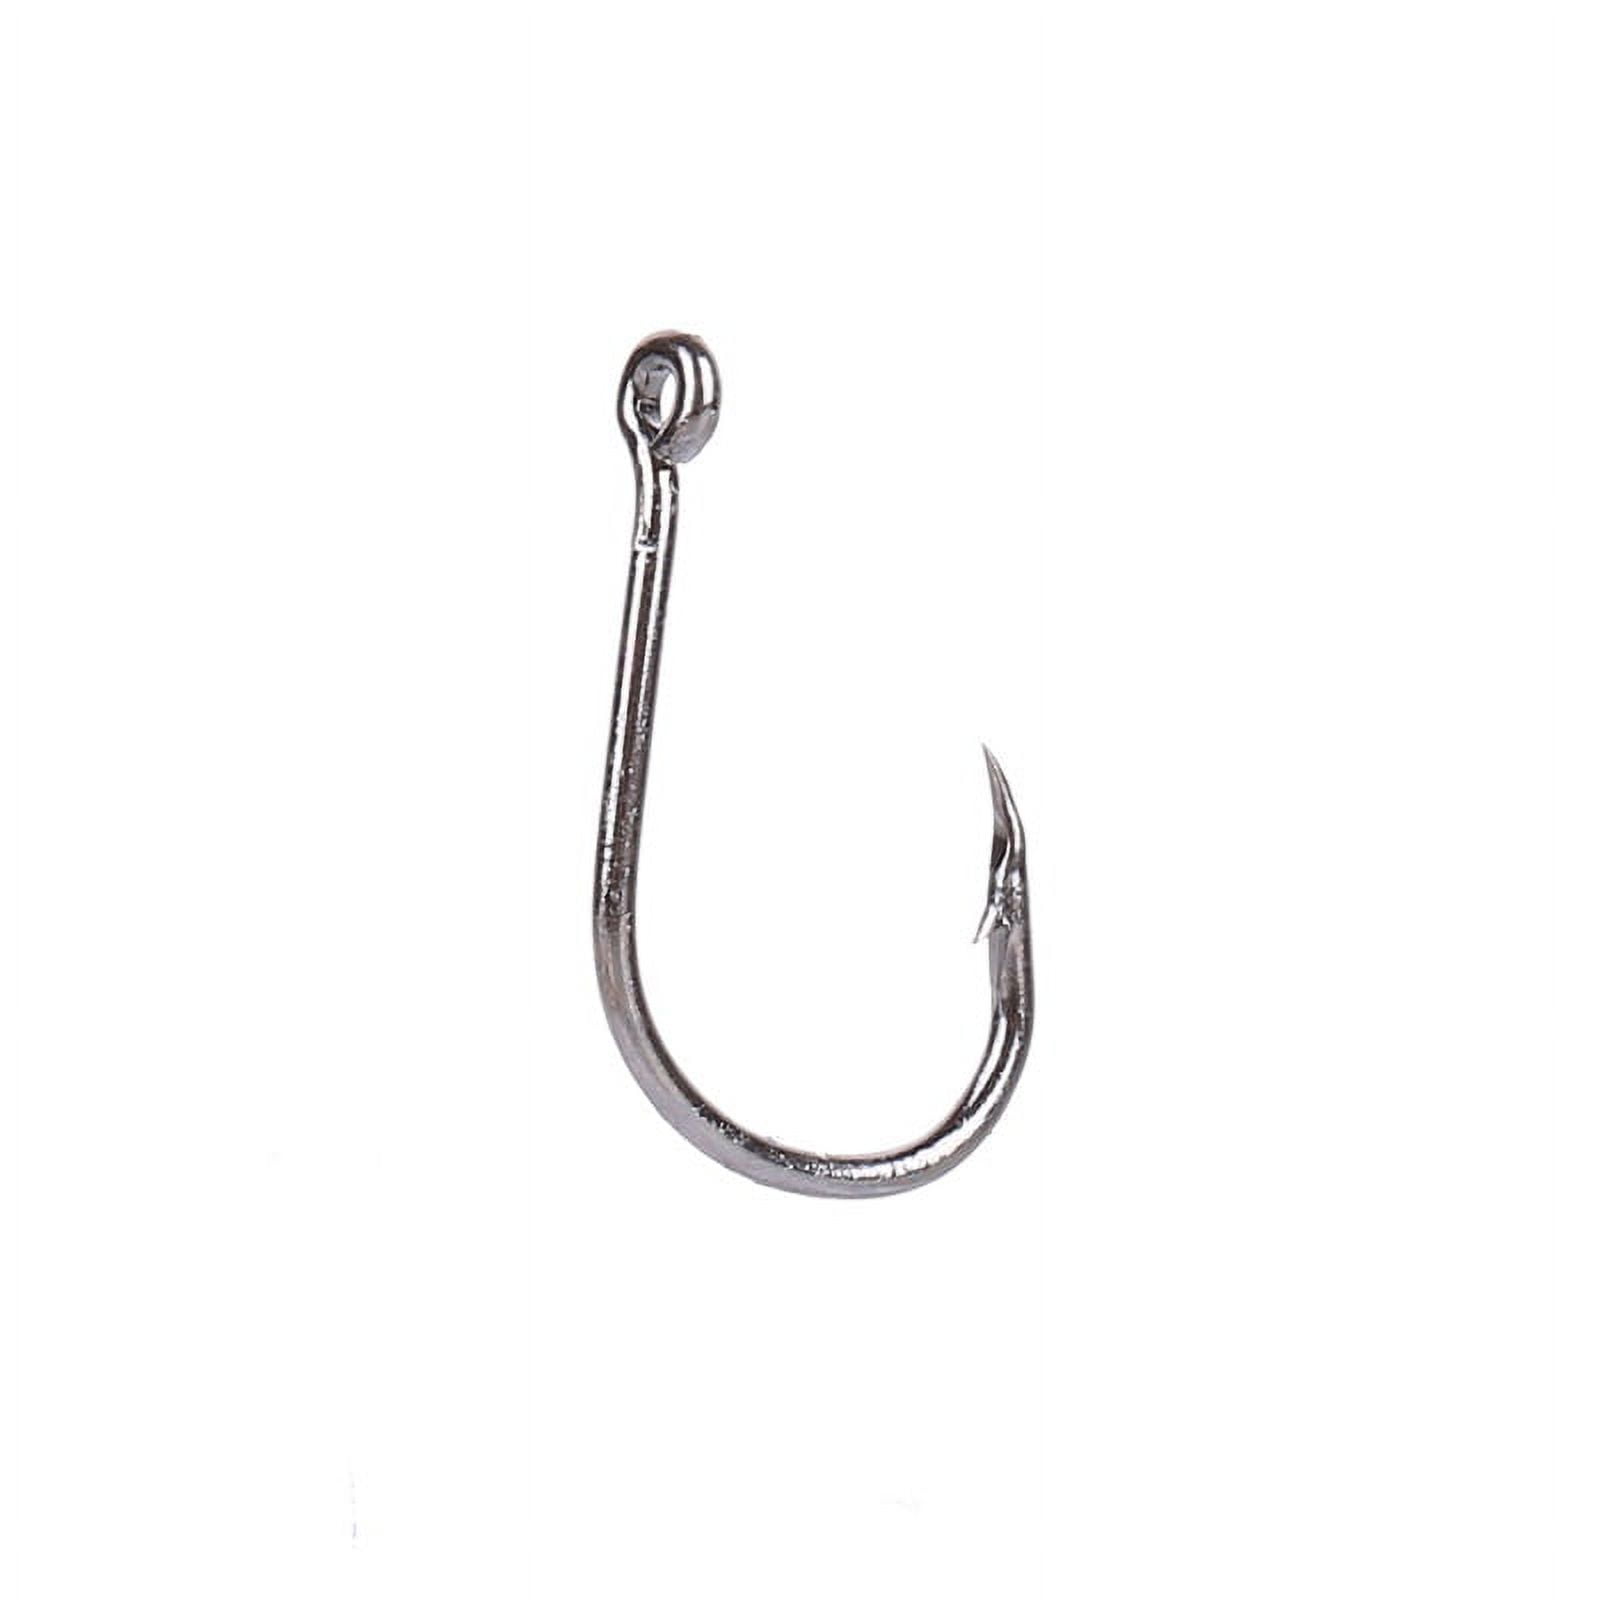 Cheap 30Pcs Fishing Treble Hook High Carbon Steel Hooks Strong Sharp Round  Bend for Lures Baits Saltwater Fishing 30pcs 15Size 18# - 5/0#